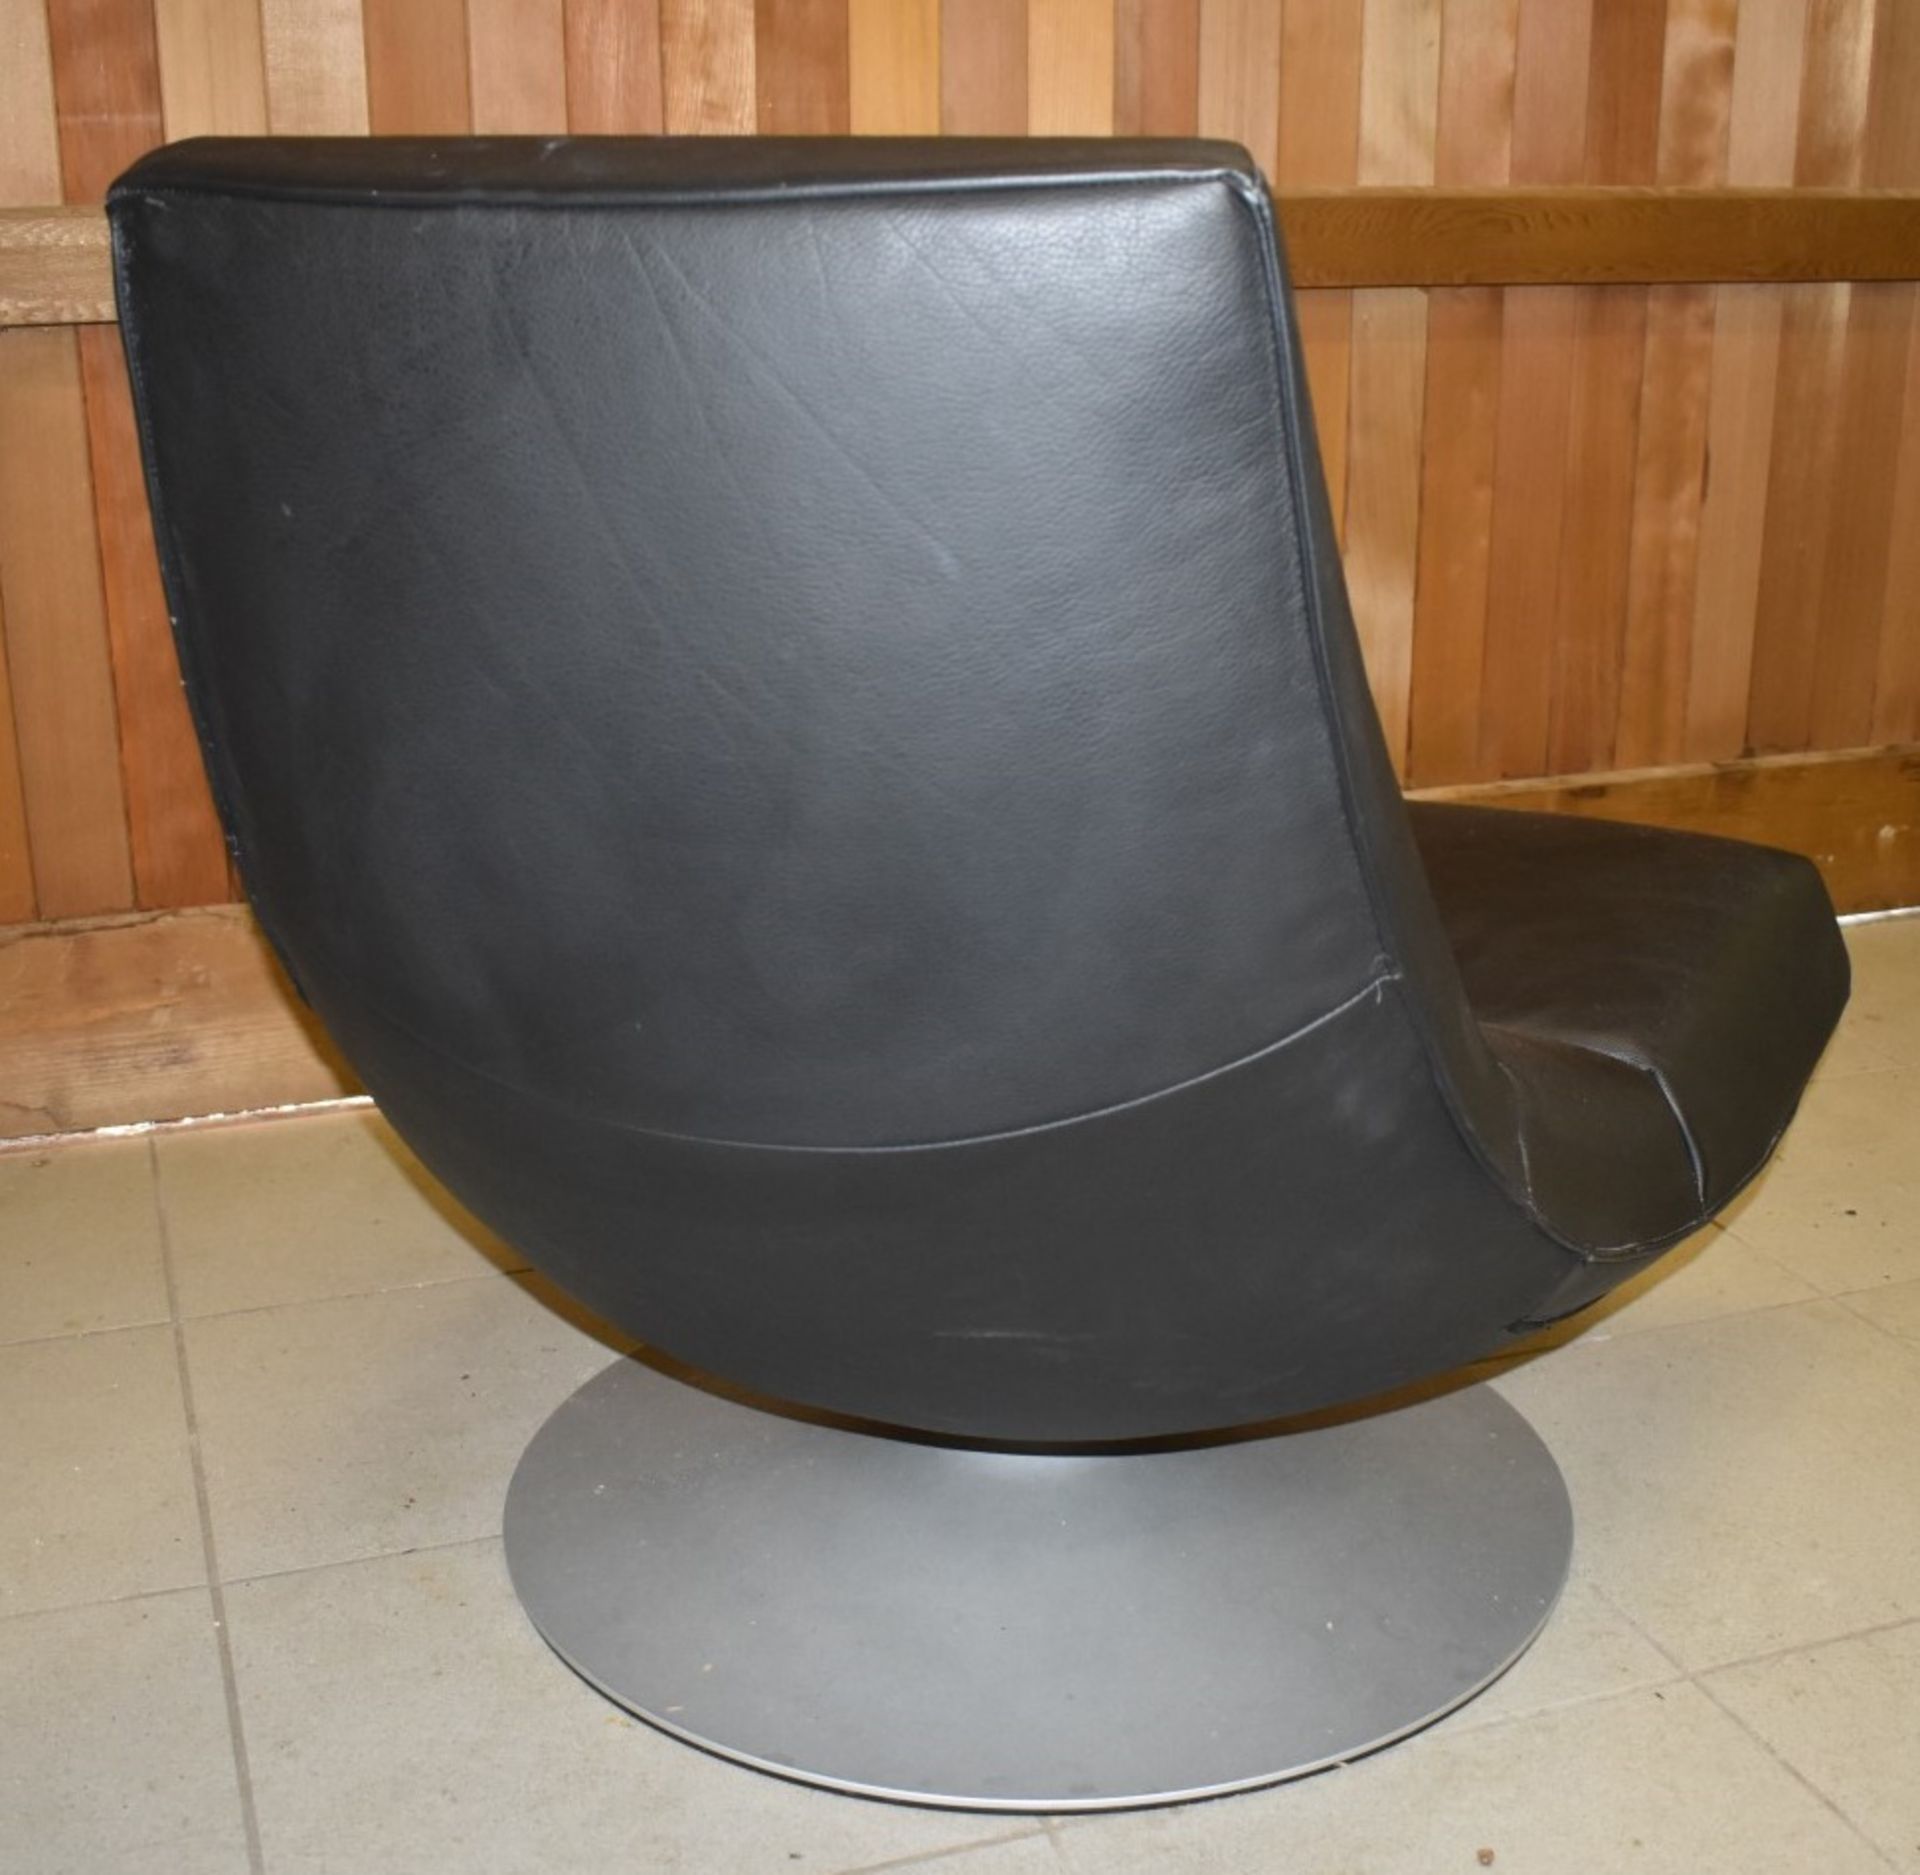 1 x Contemporary Black Leather Swivel Chair With Silver Base - Dimensions: H85/40 x W97 x D100 cms - - Image 2 of 6